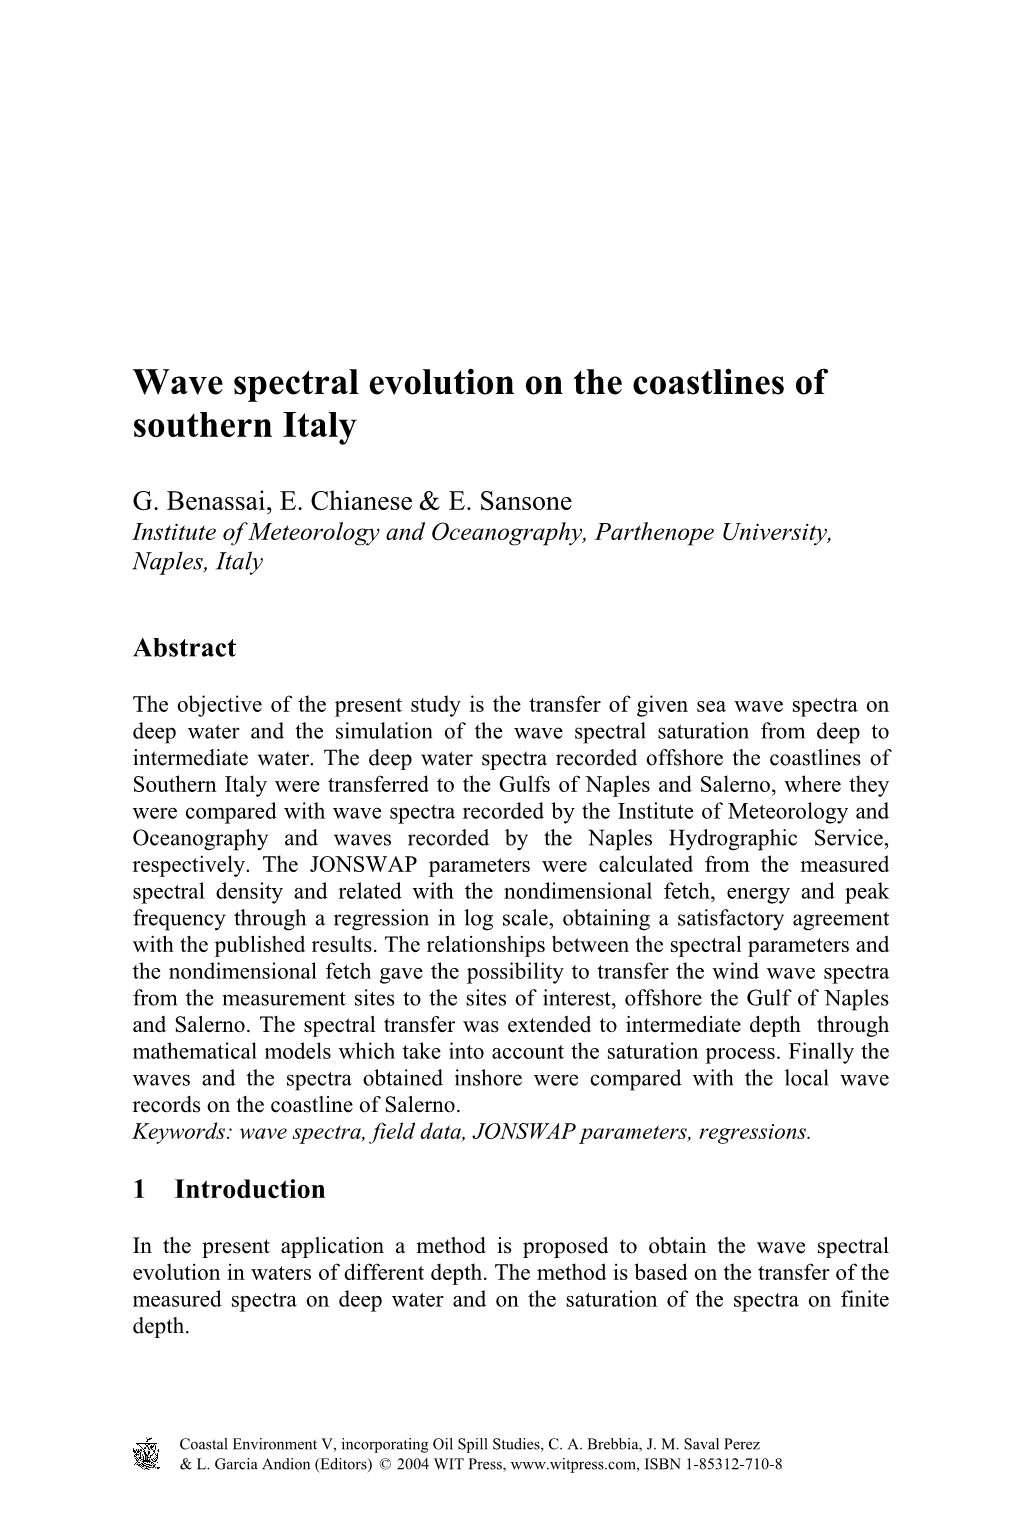 Wave Spectral Evolution on the Coastlines of Southern Italy